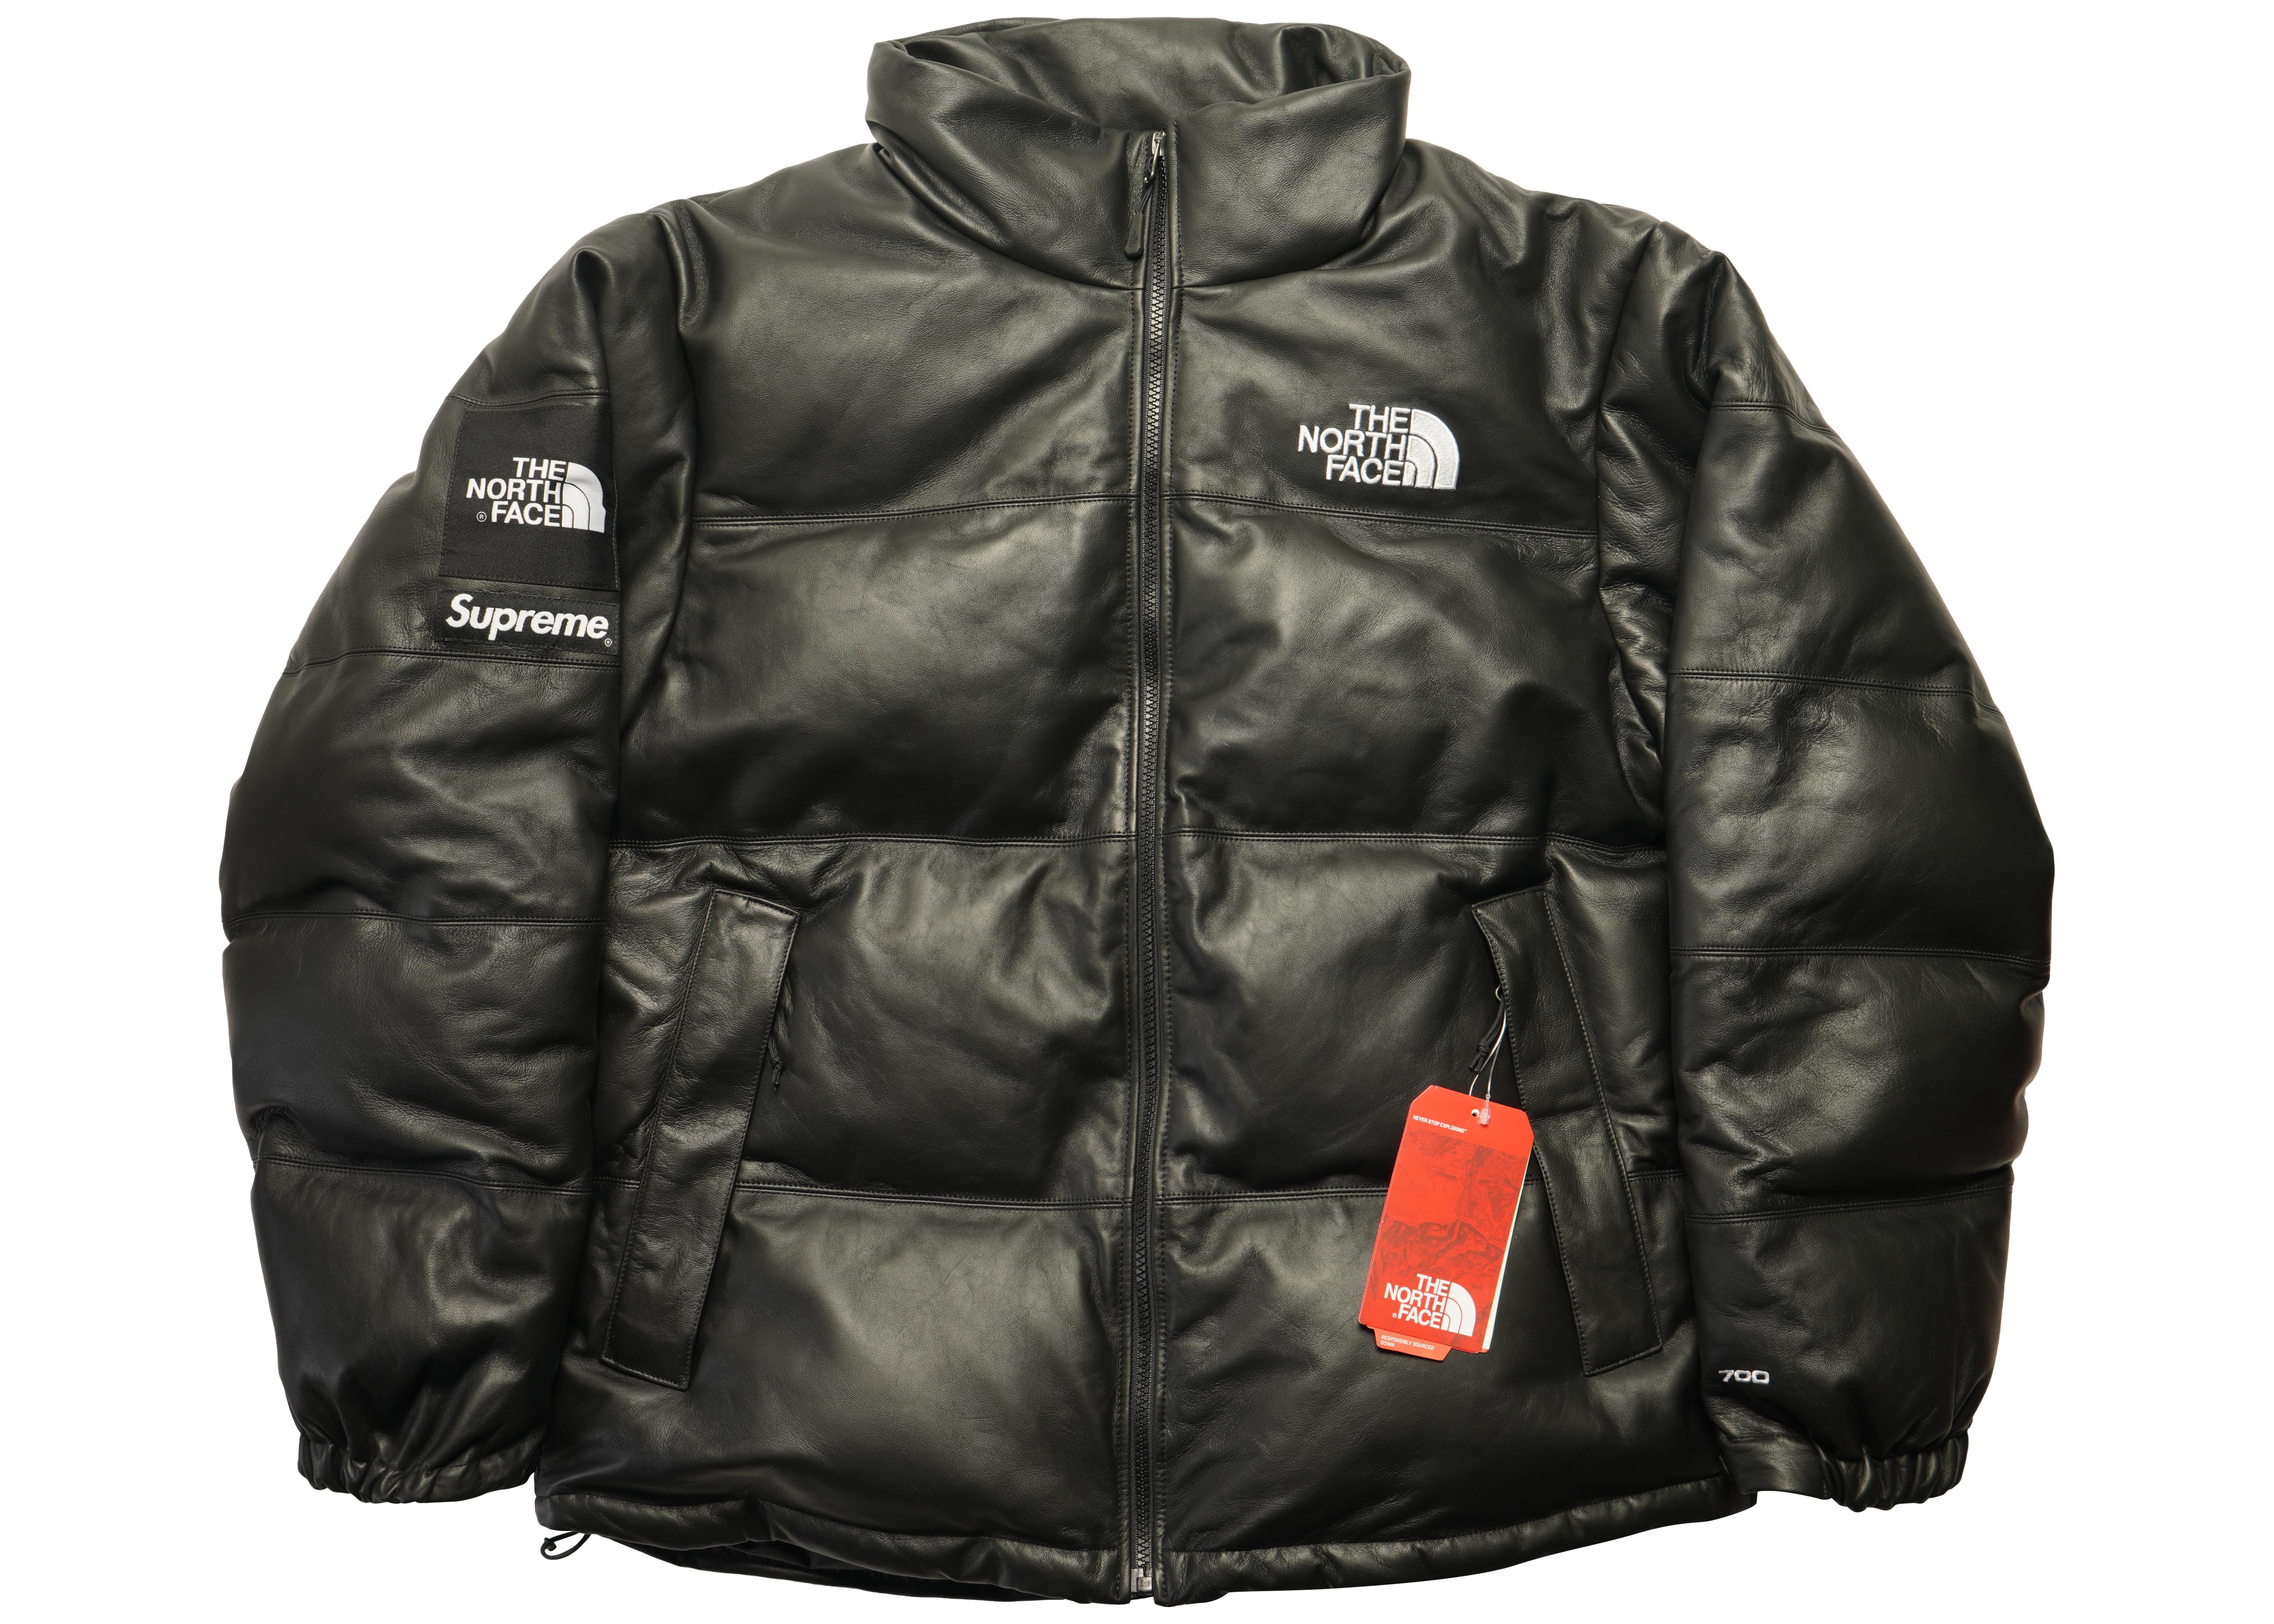 Supreme North Face Down Jacket Top Sellers, 54% OFF | www.al-anon.be